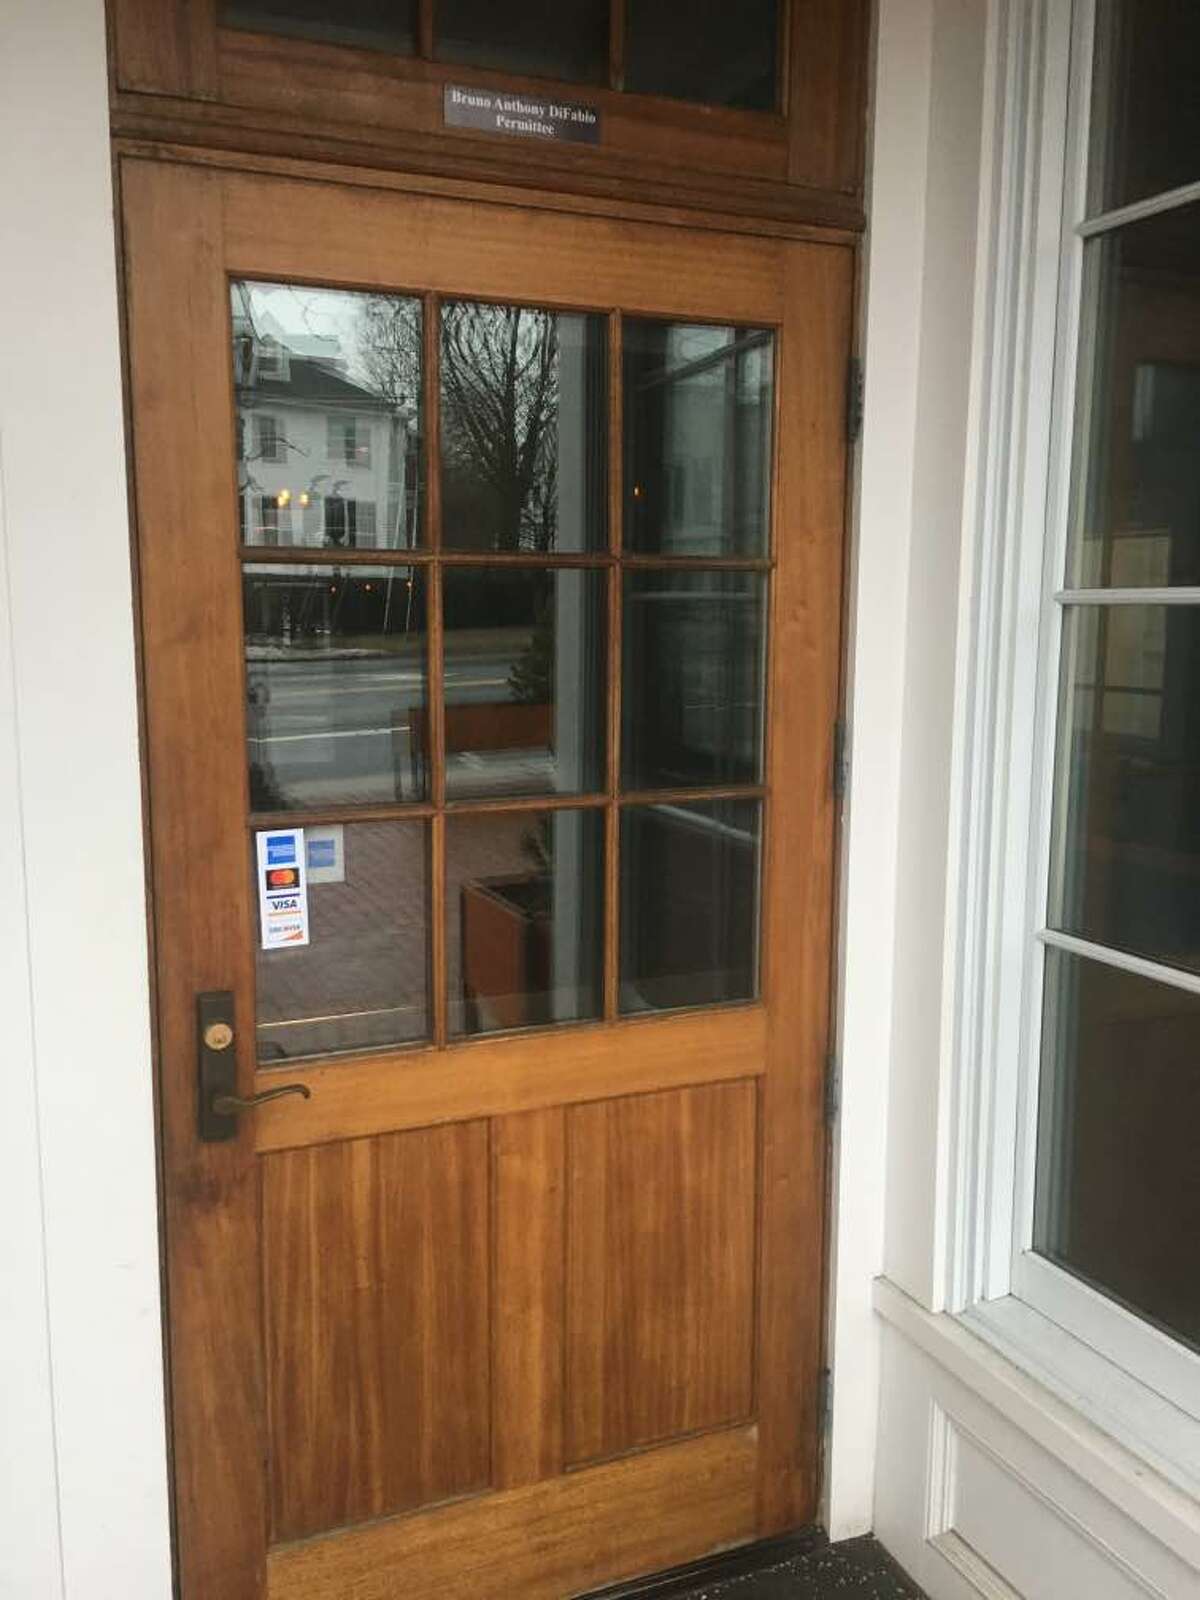 The front door of The Village Tavern doesn't have a closing sign but the owner has announced the business will be sold. It will be closed for the foreseeable future.